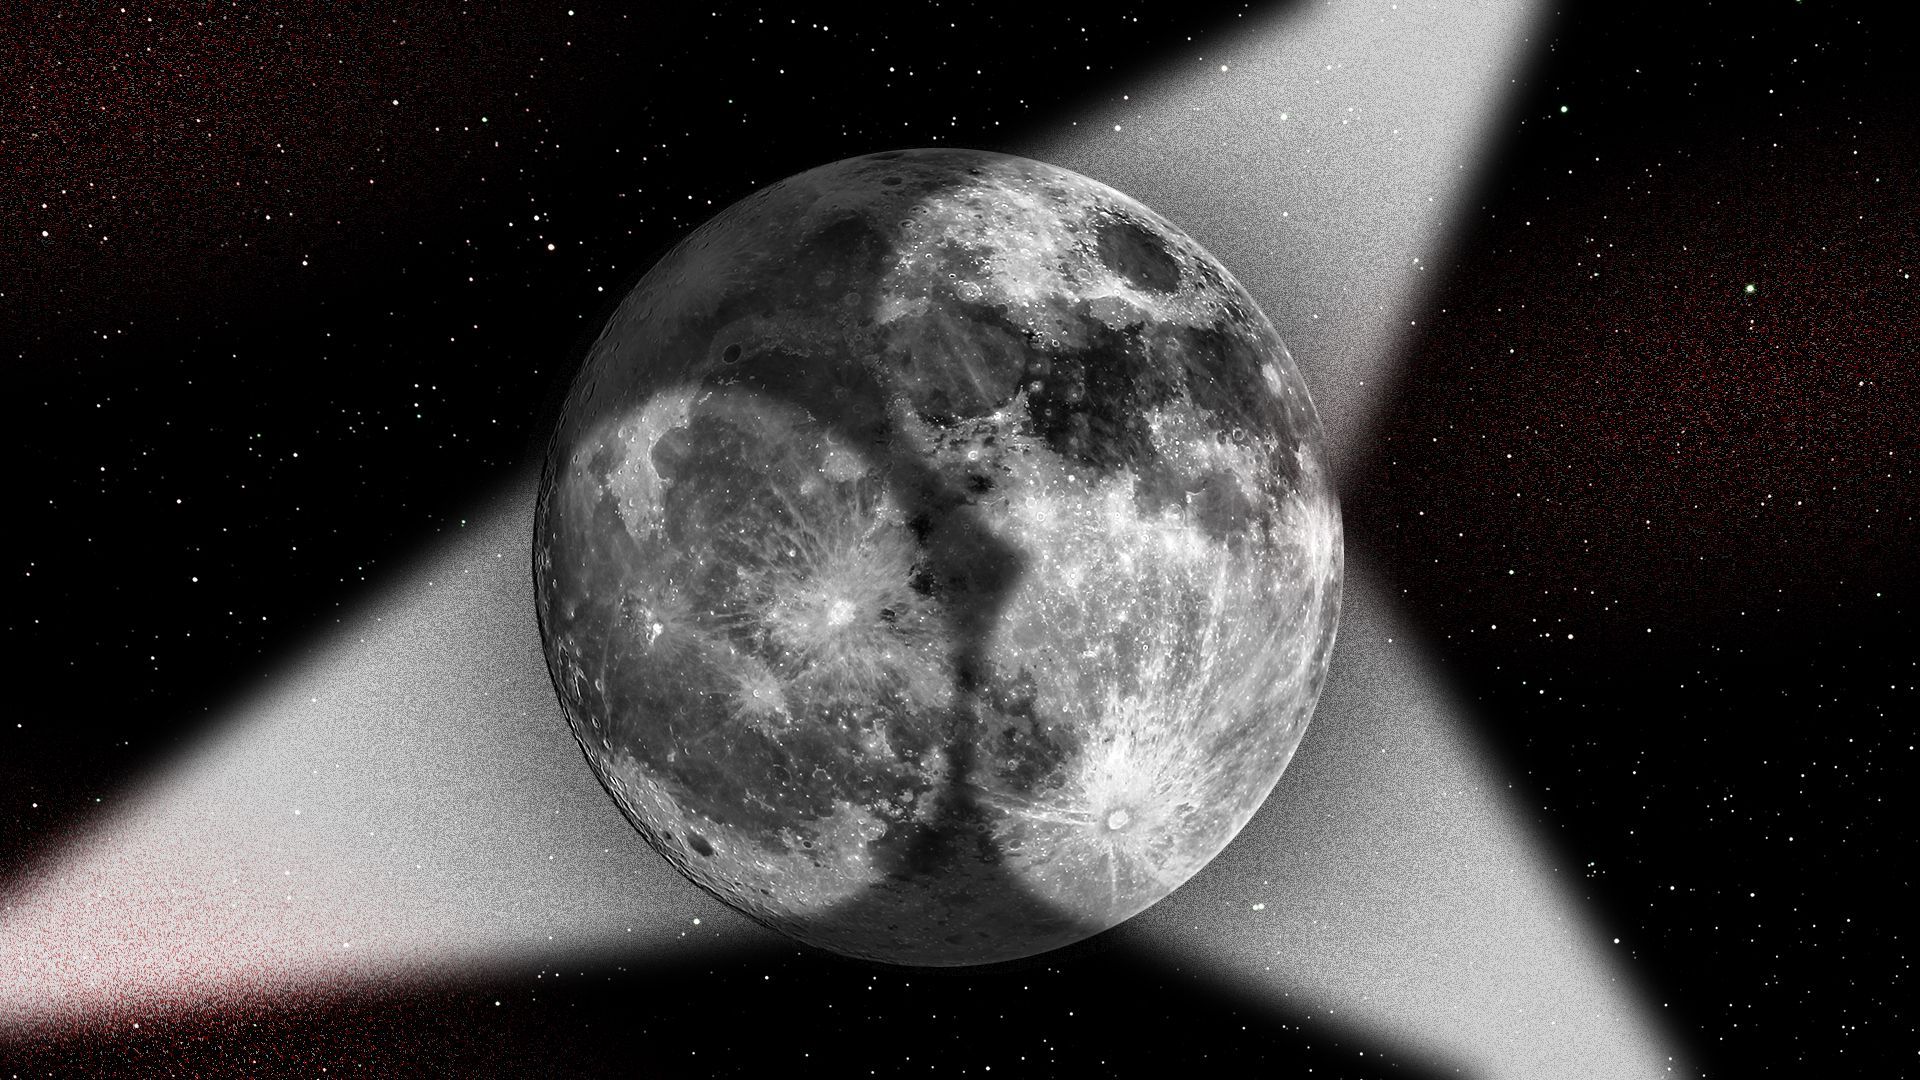 Illustration of three spotlights on the moon surrounded by stars